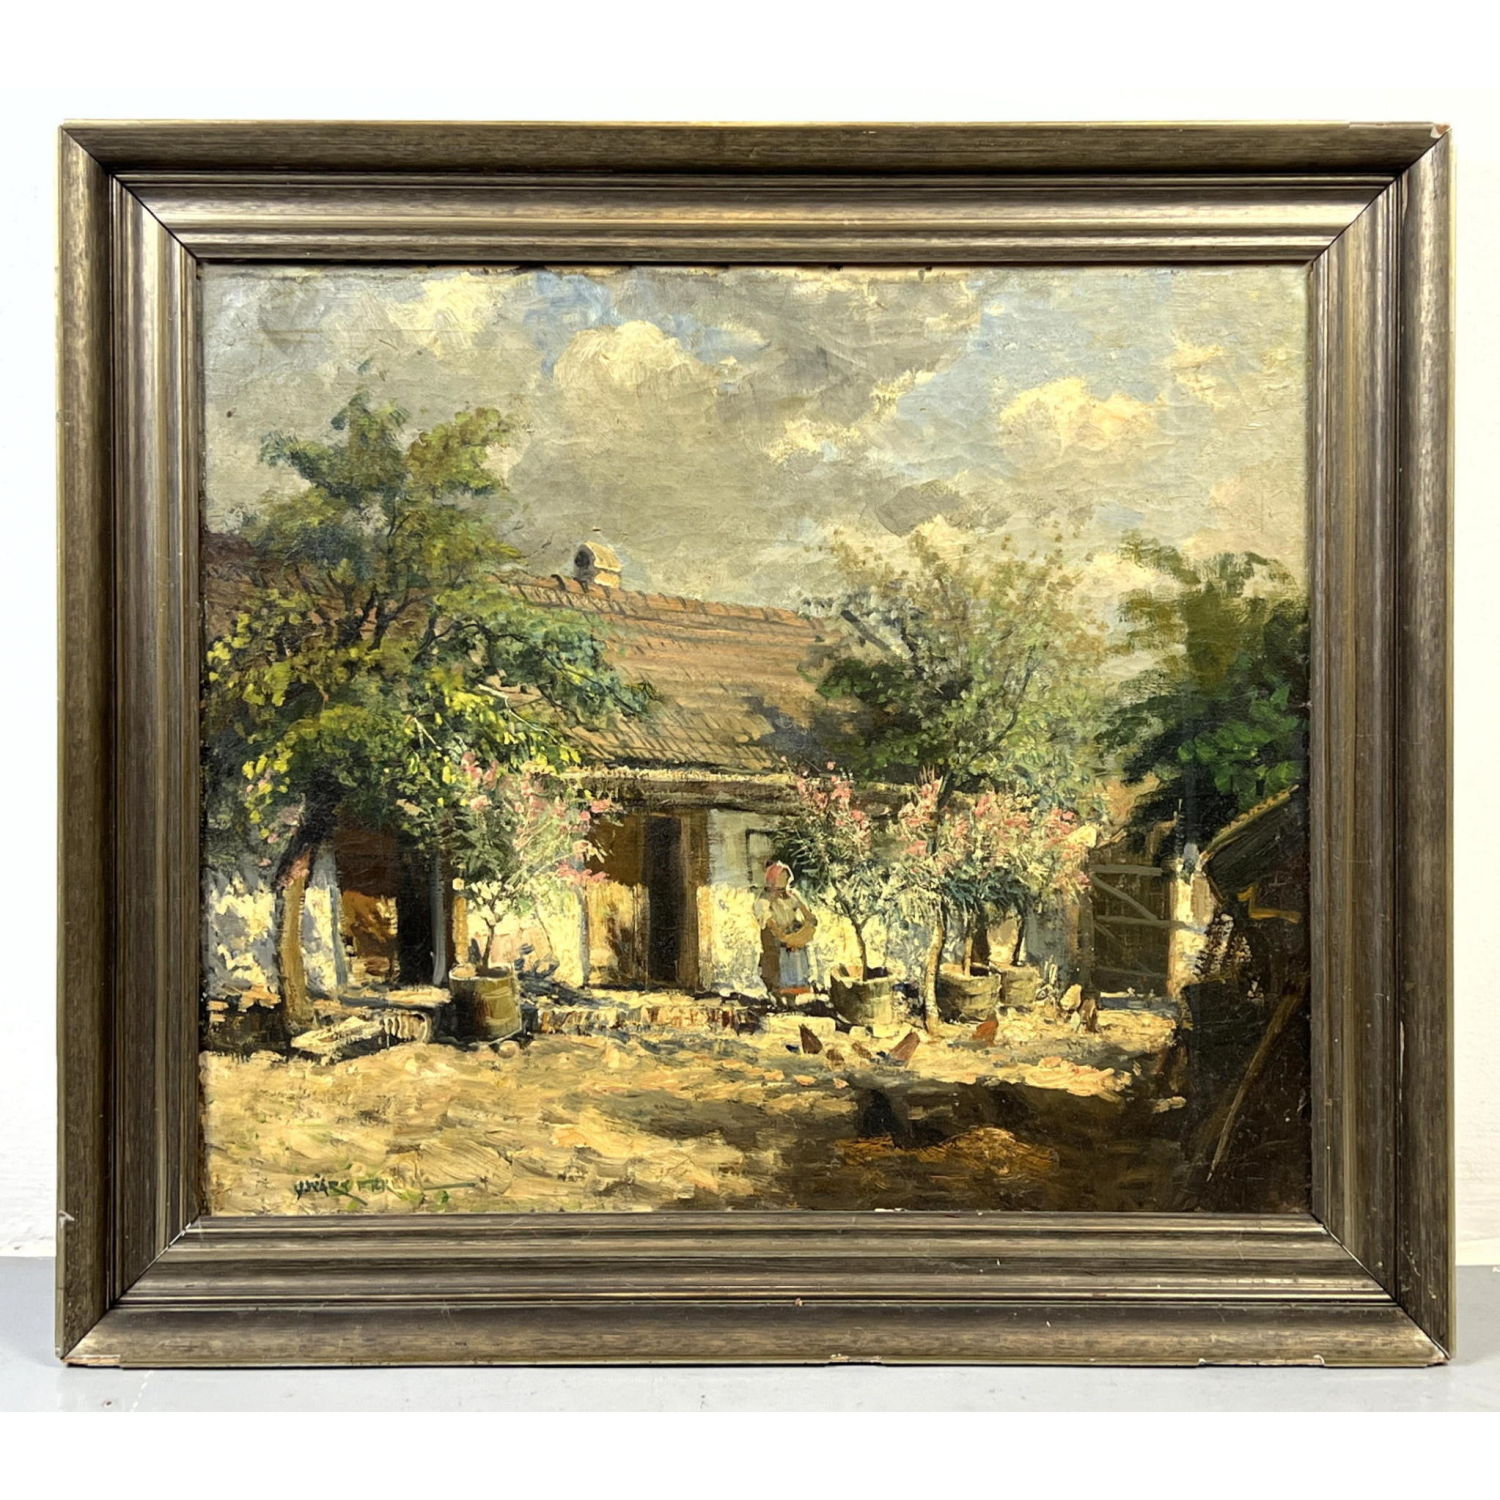 Signed Painting. Rural Tropical